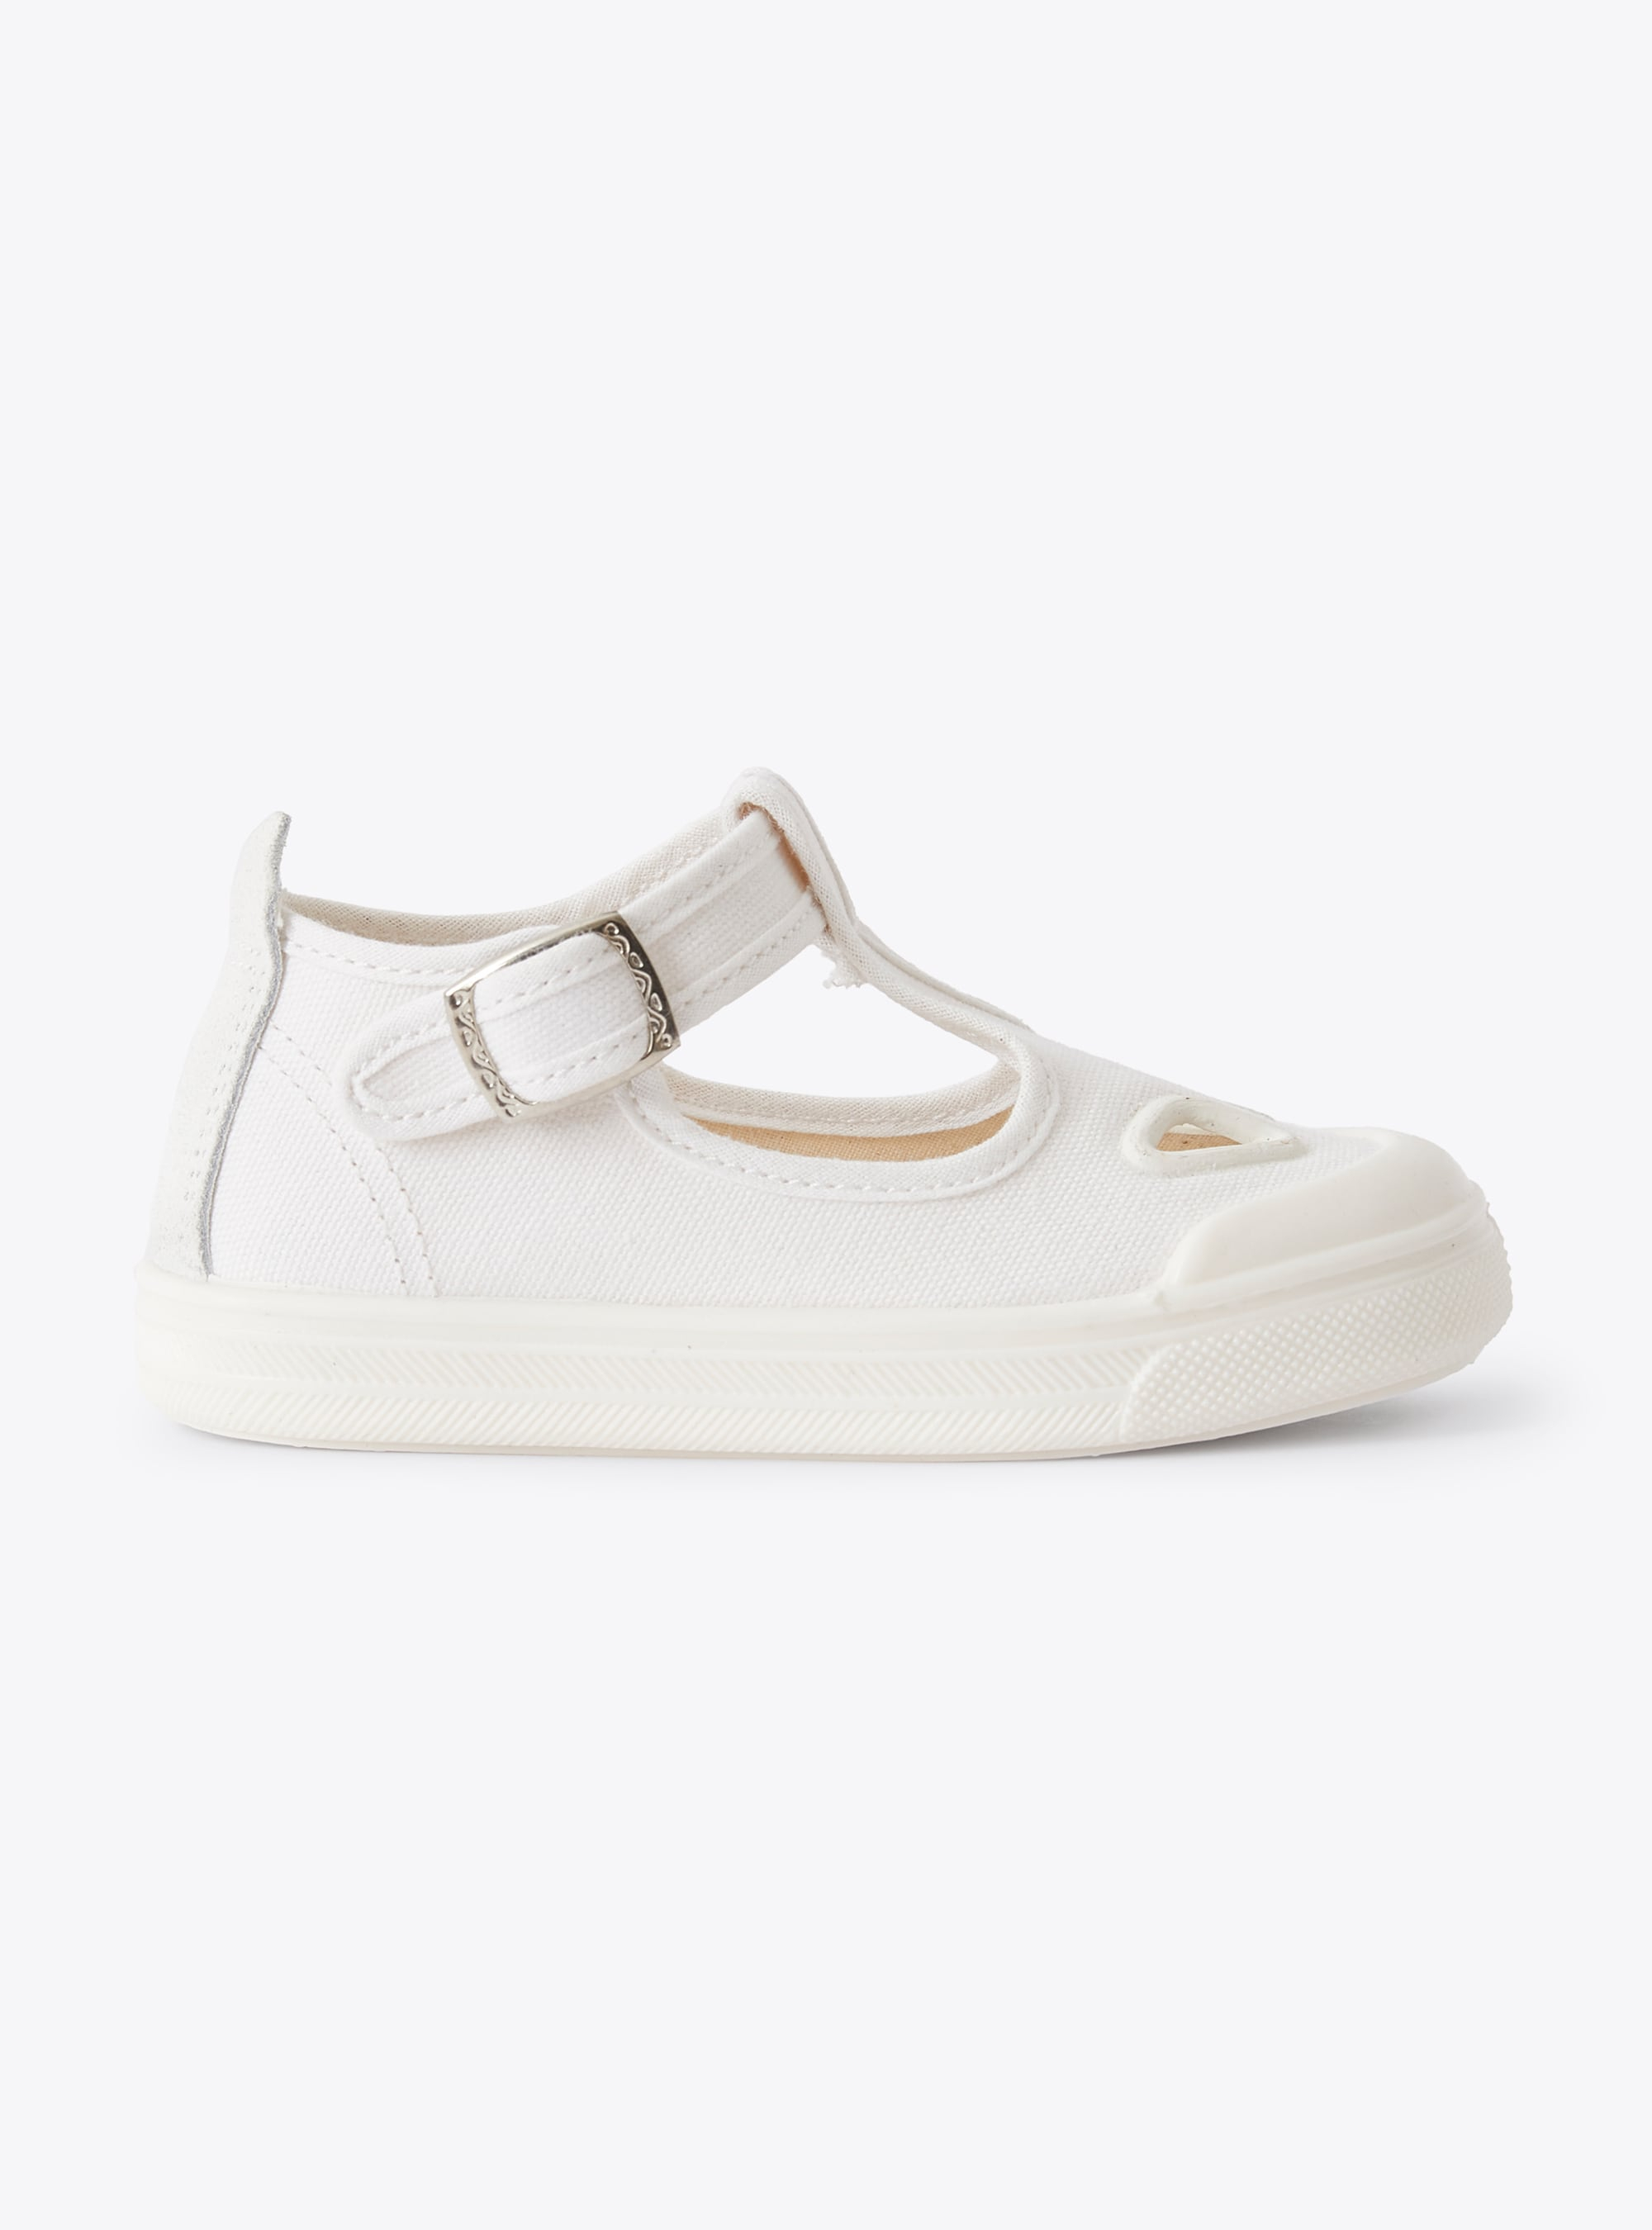 Sandal in white canvas with eyelets - White | Il Gufo